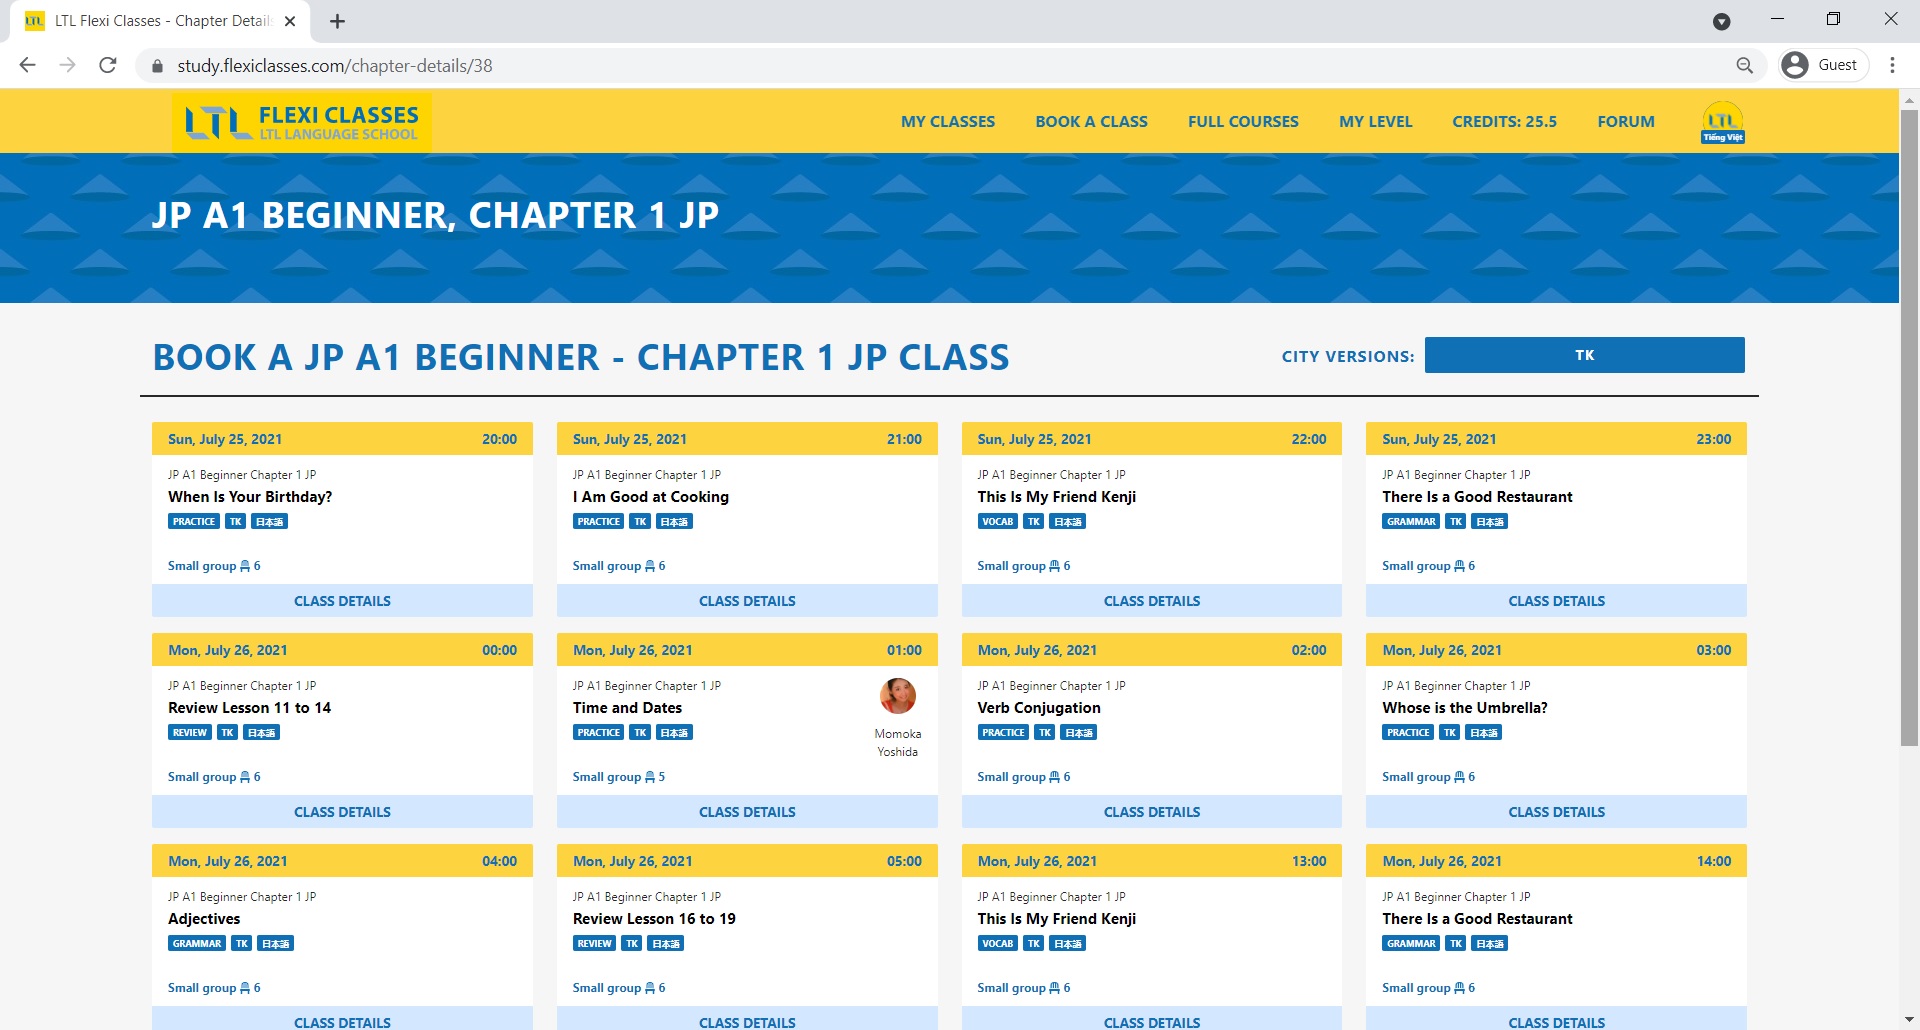 Upcoming Classes for a Chapter